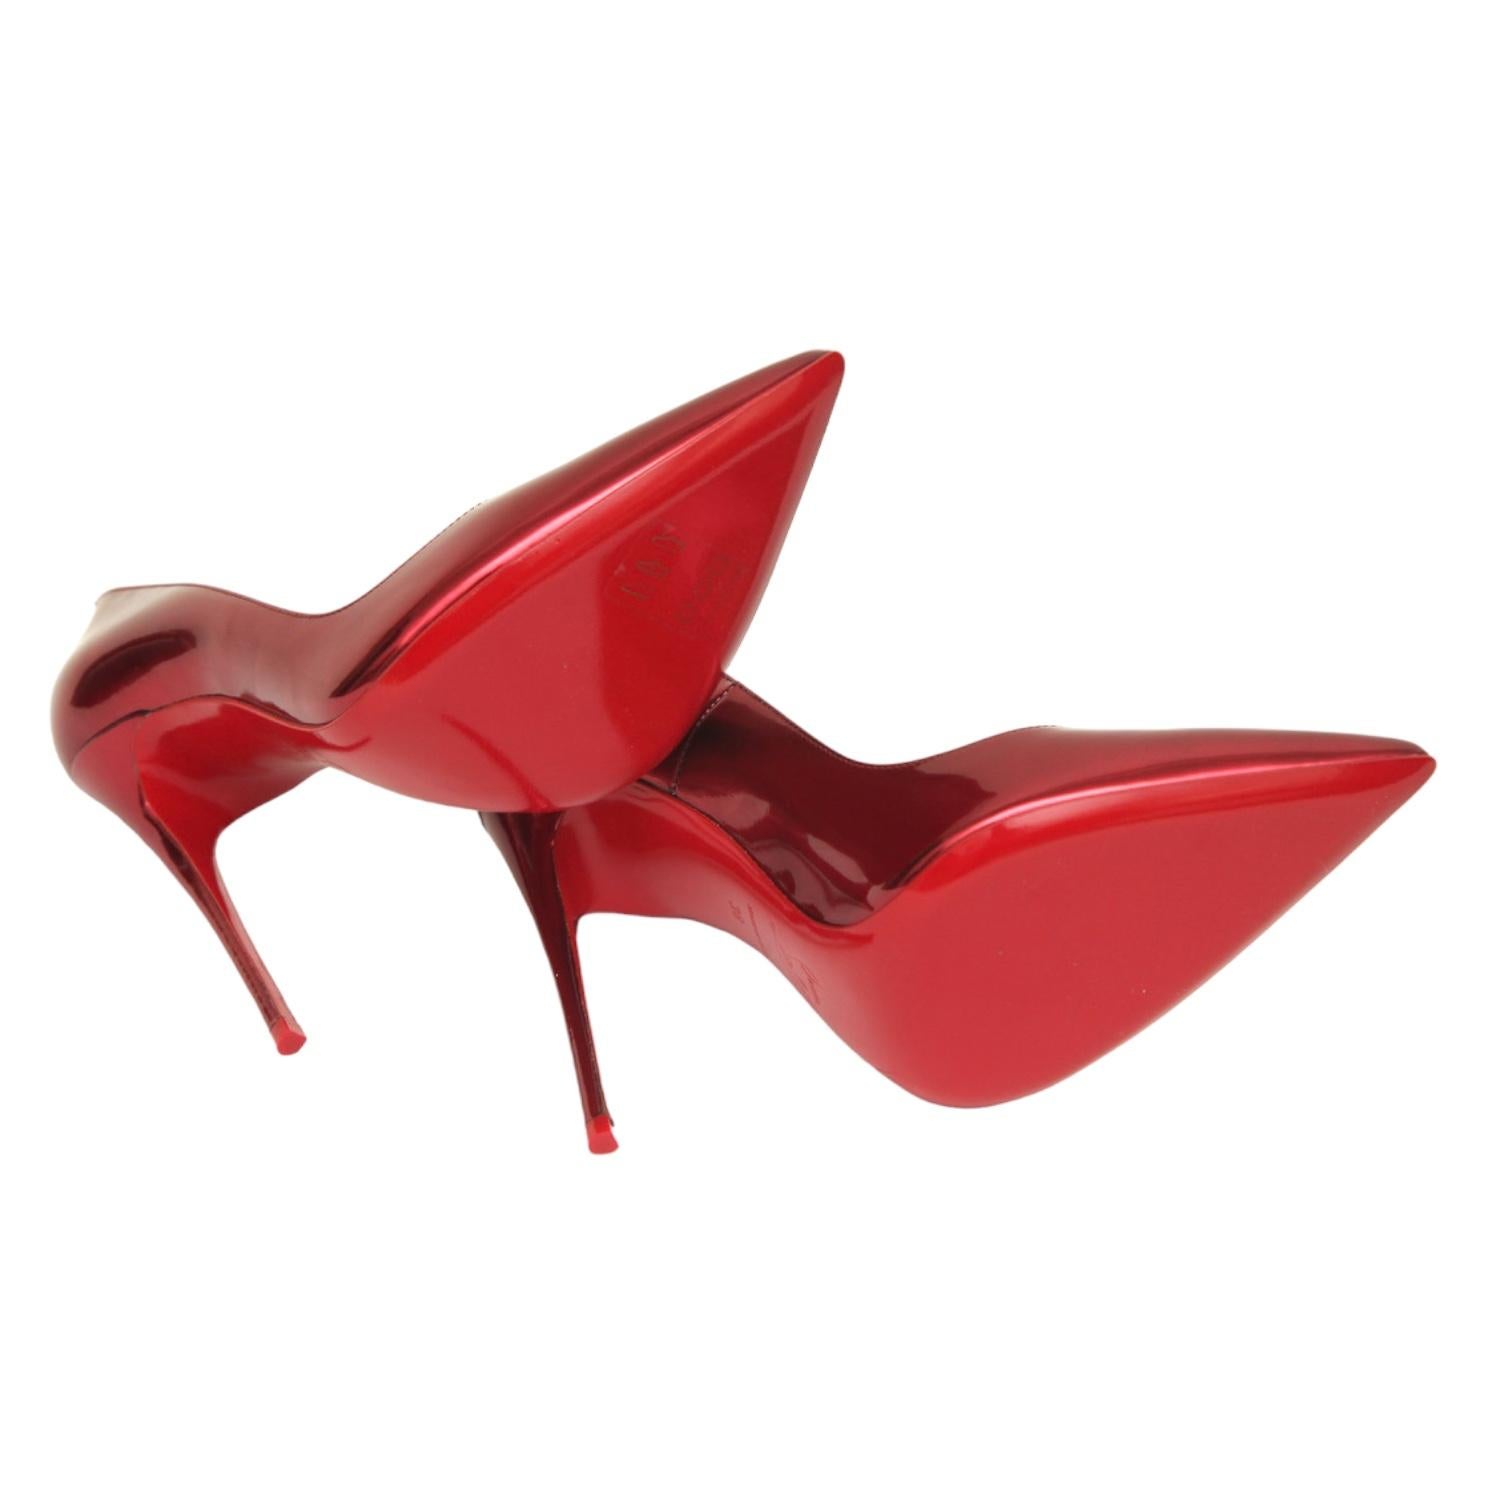 CHRISTIAN LOUBOUTIN So Kate 120 Red Patent Leather Pump Pointed Toe 38 6